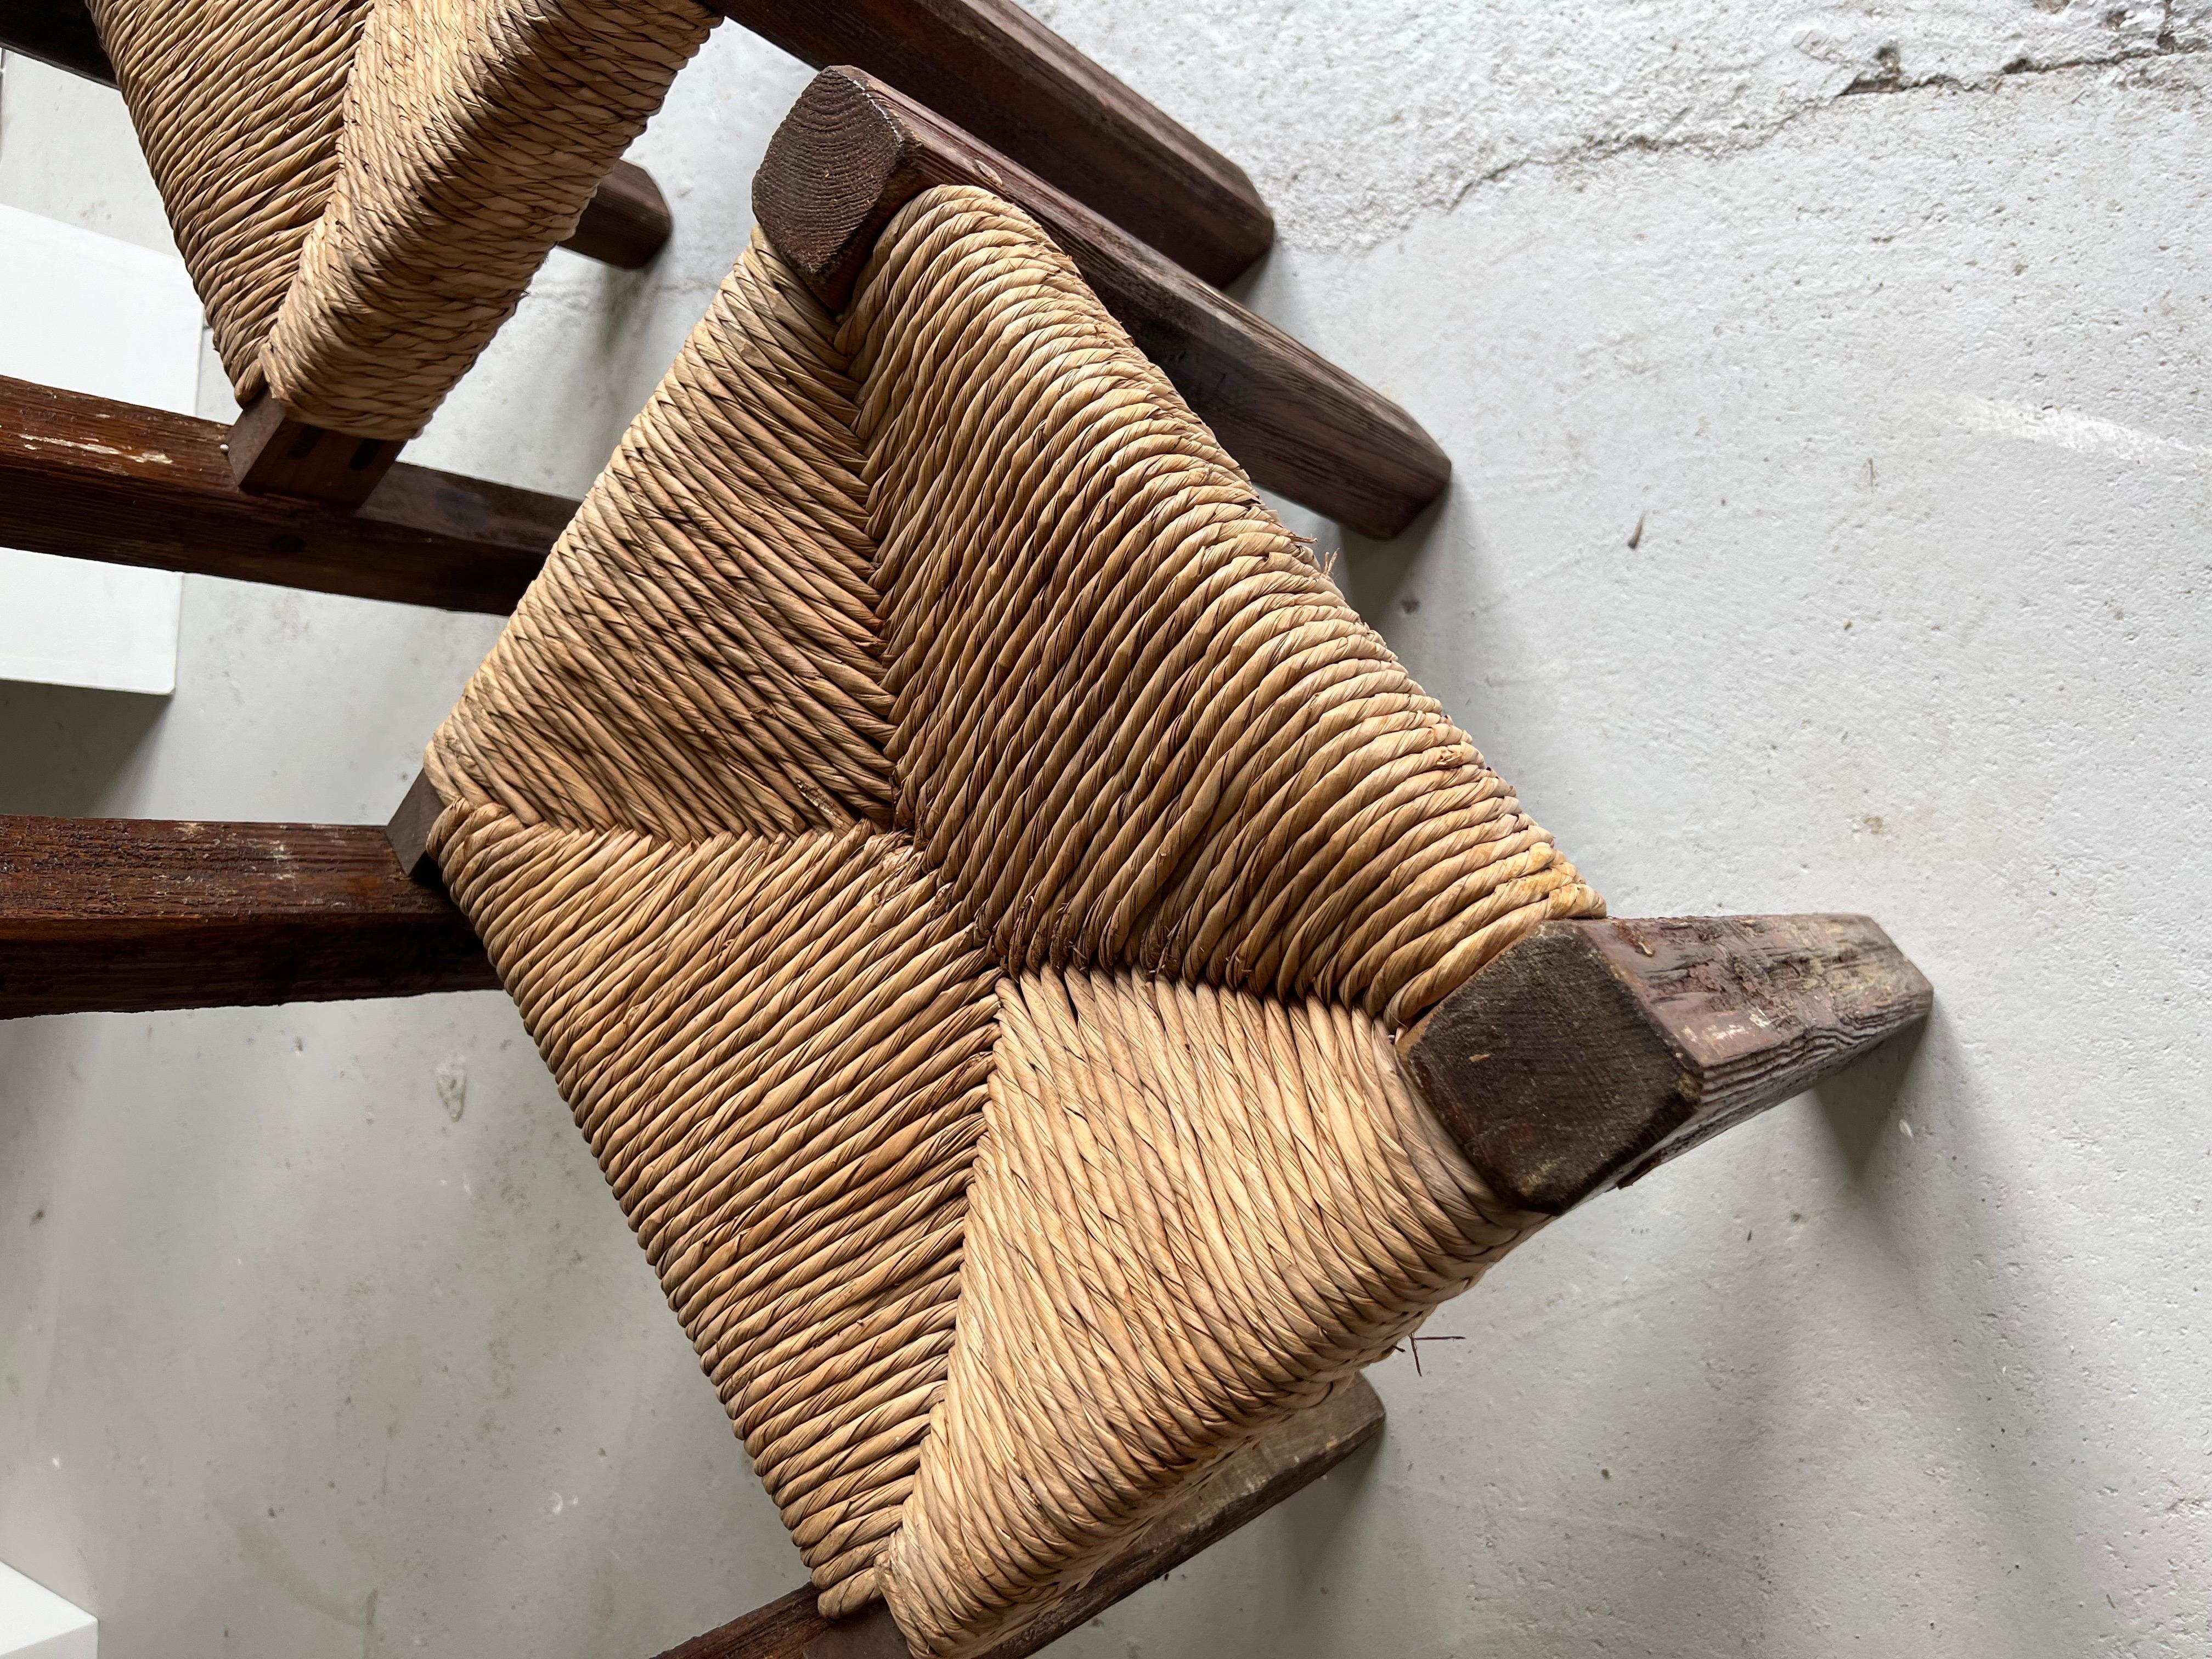 Pair of Brutalist Chairs in Wood and Straw, France Auvergne, 1950s For Sale 3